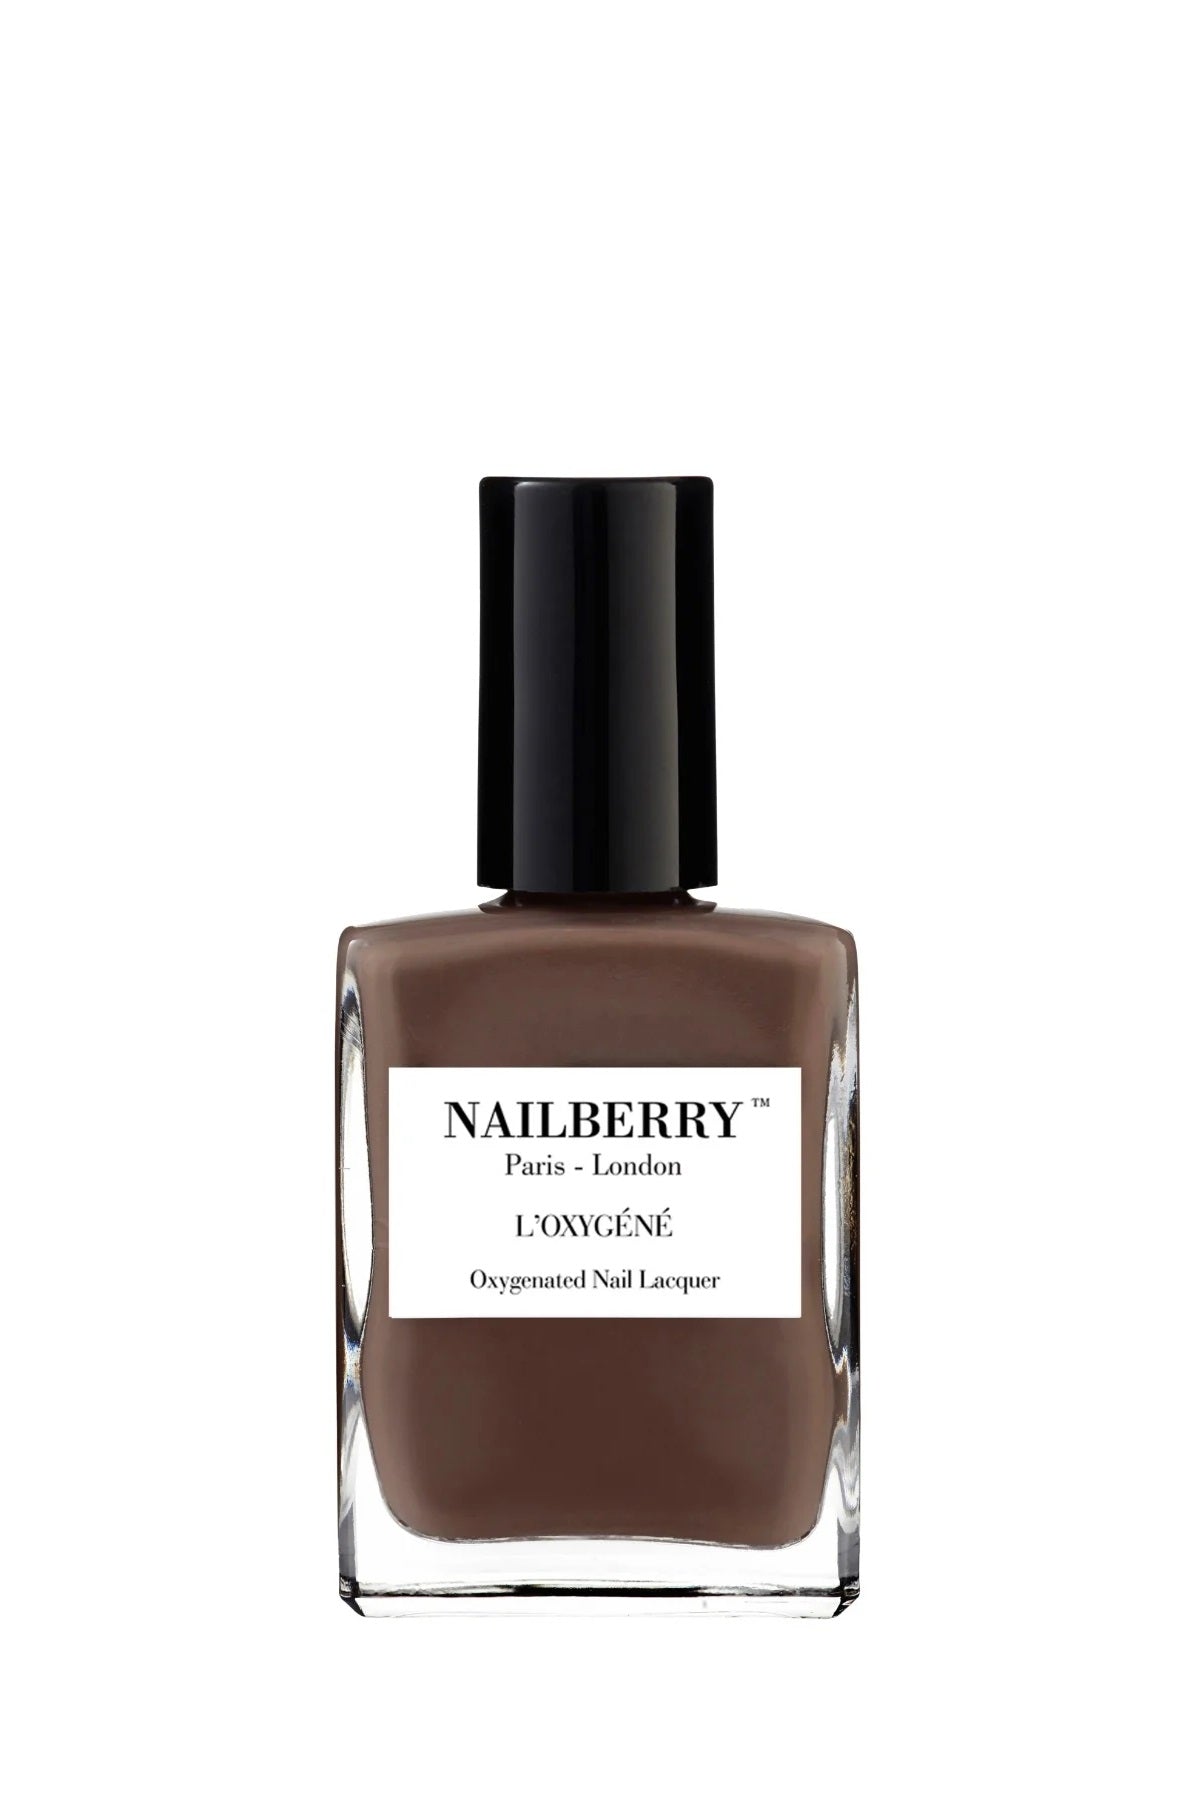 NAILBERRY Taupe La